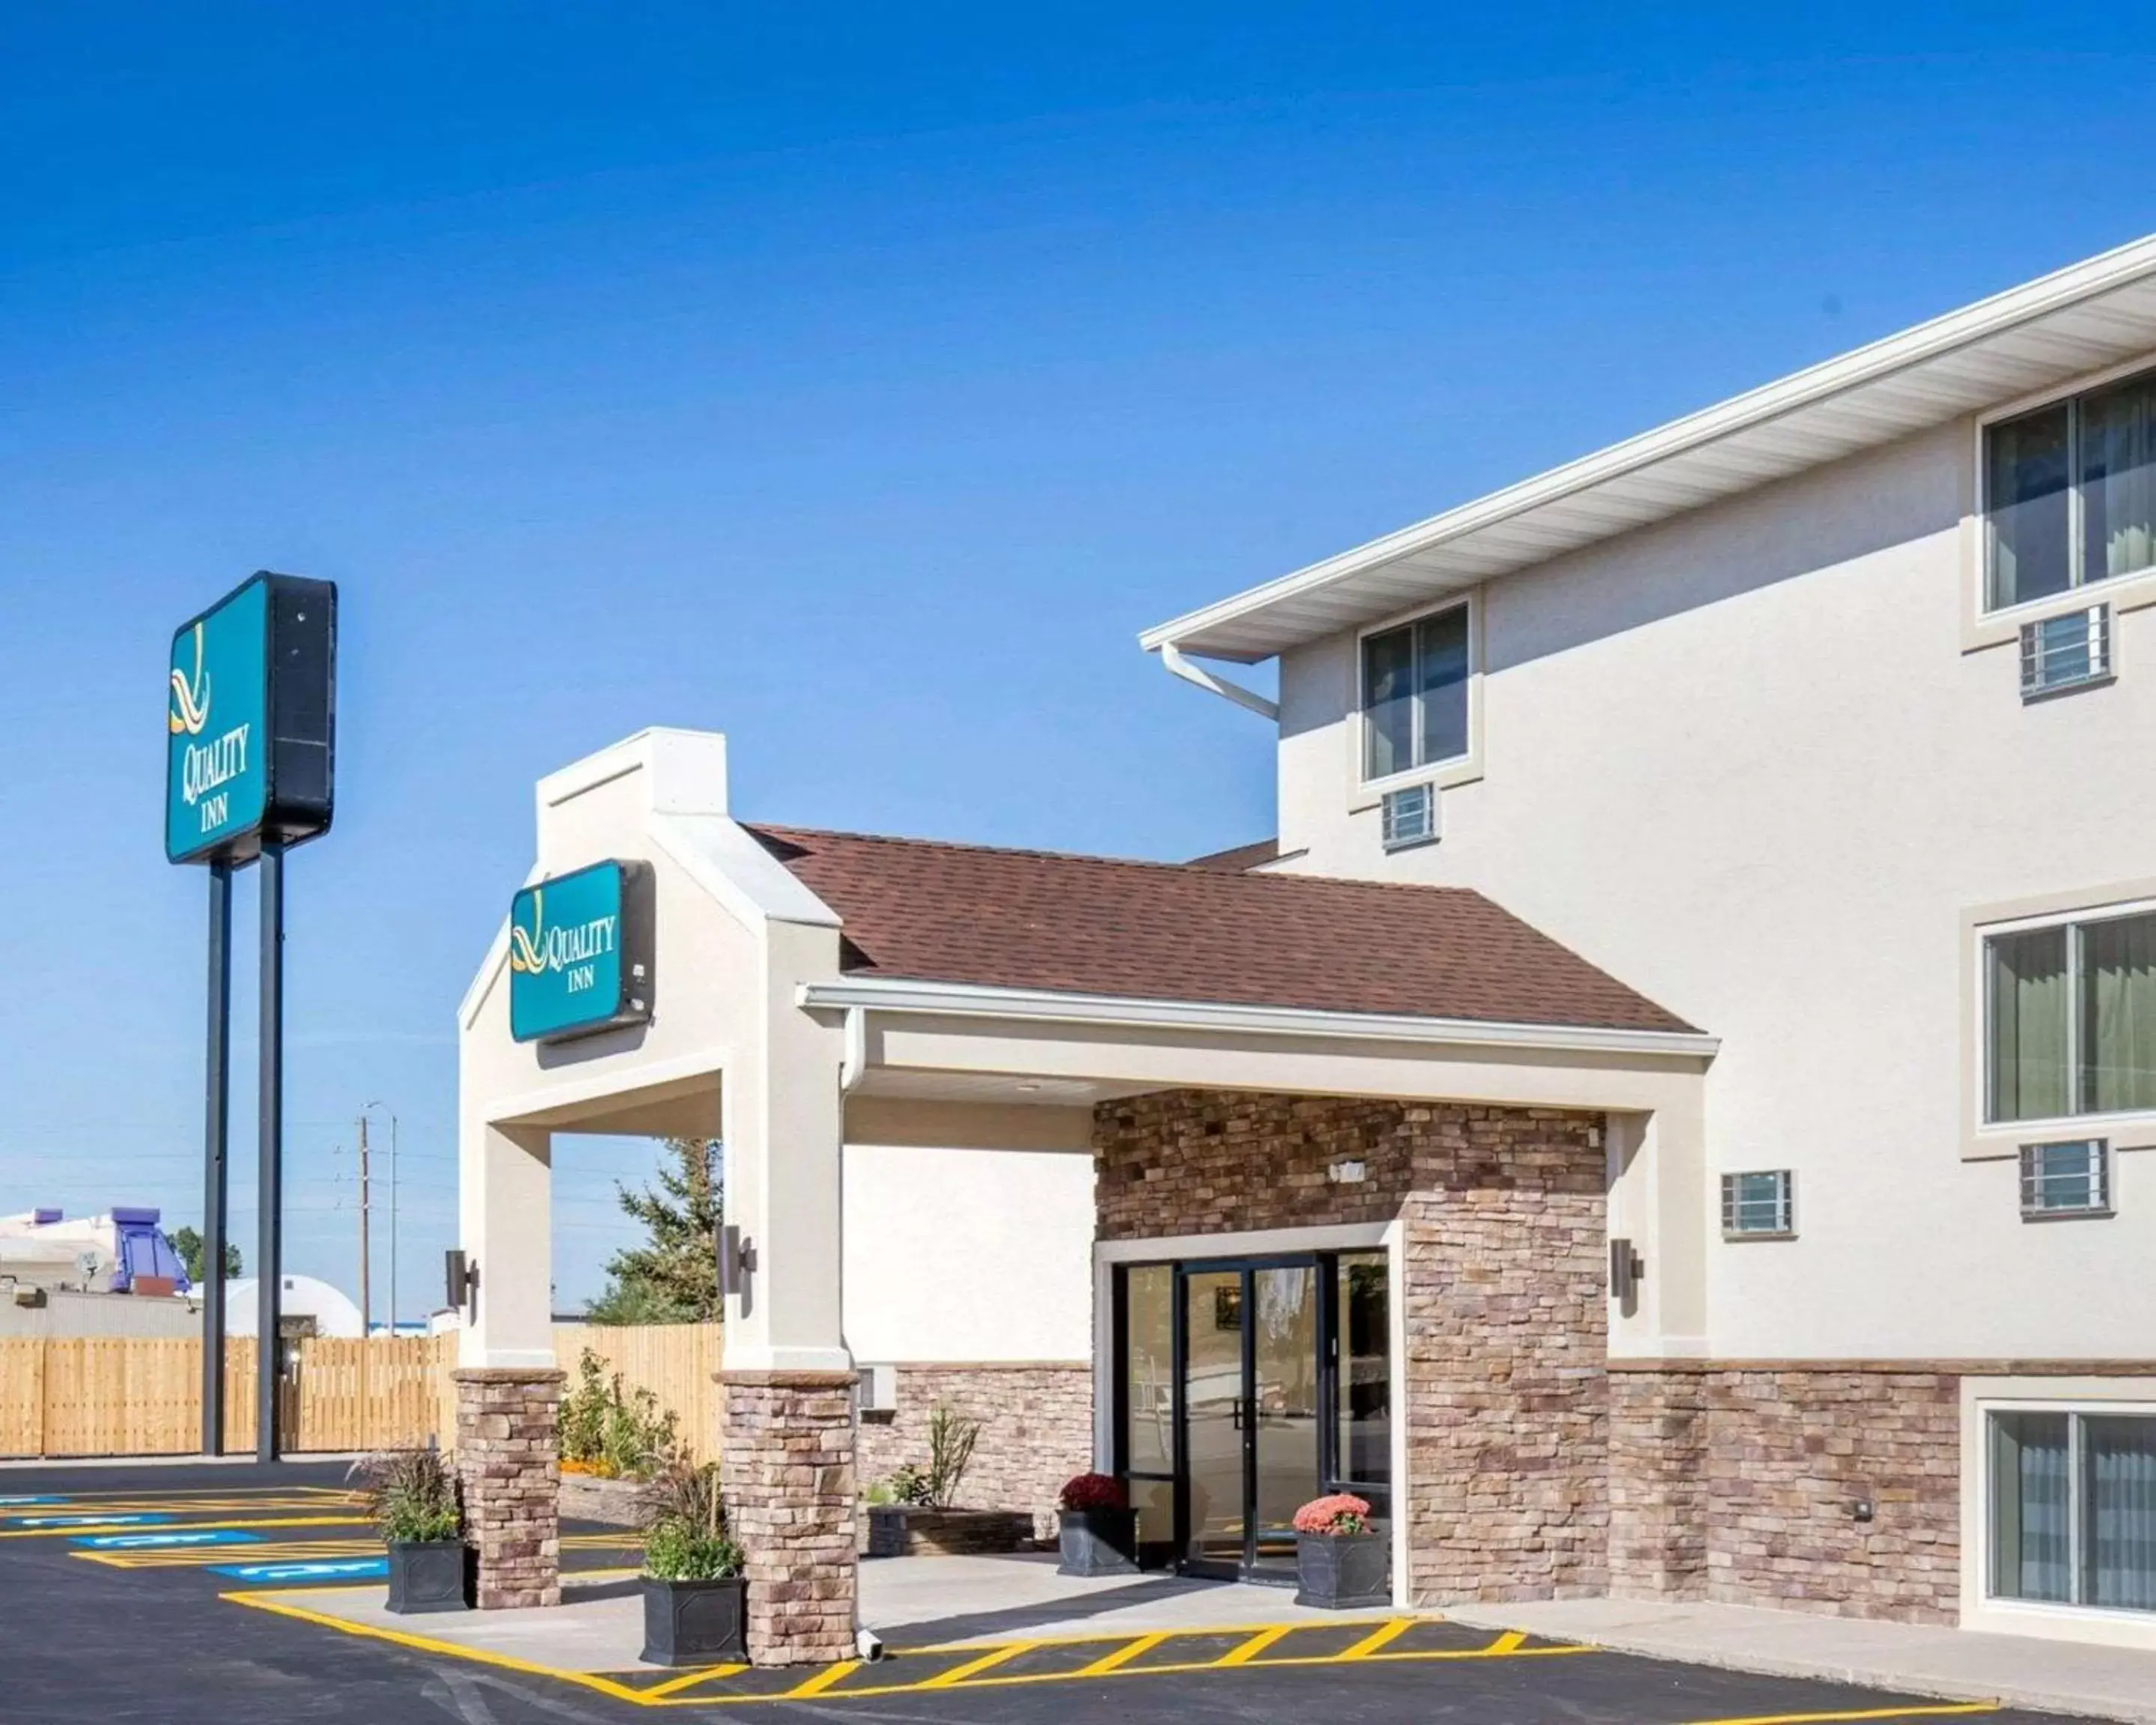 Property Building in Quality Inn Gillette